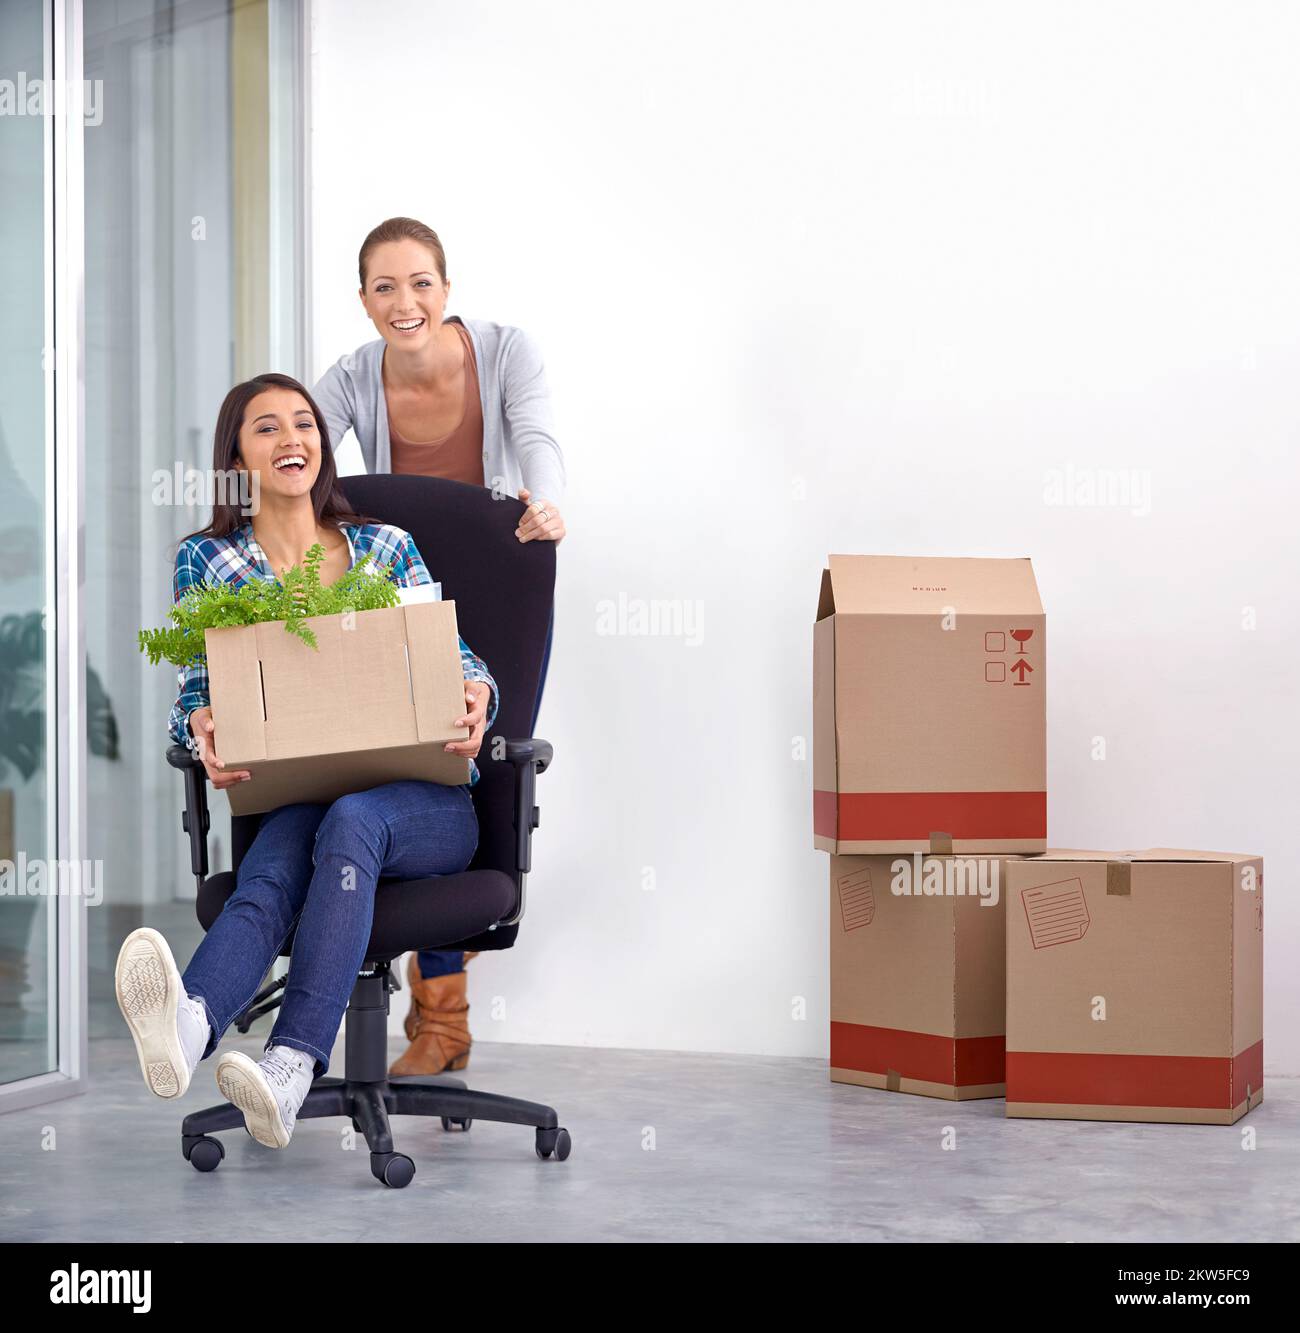 Showing her their new office space. two female entrepreneurs moving into a new office. Stock Photo